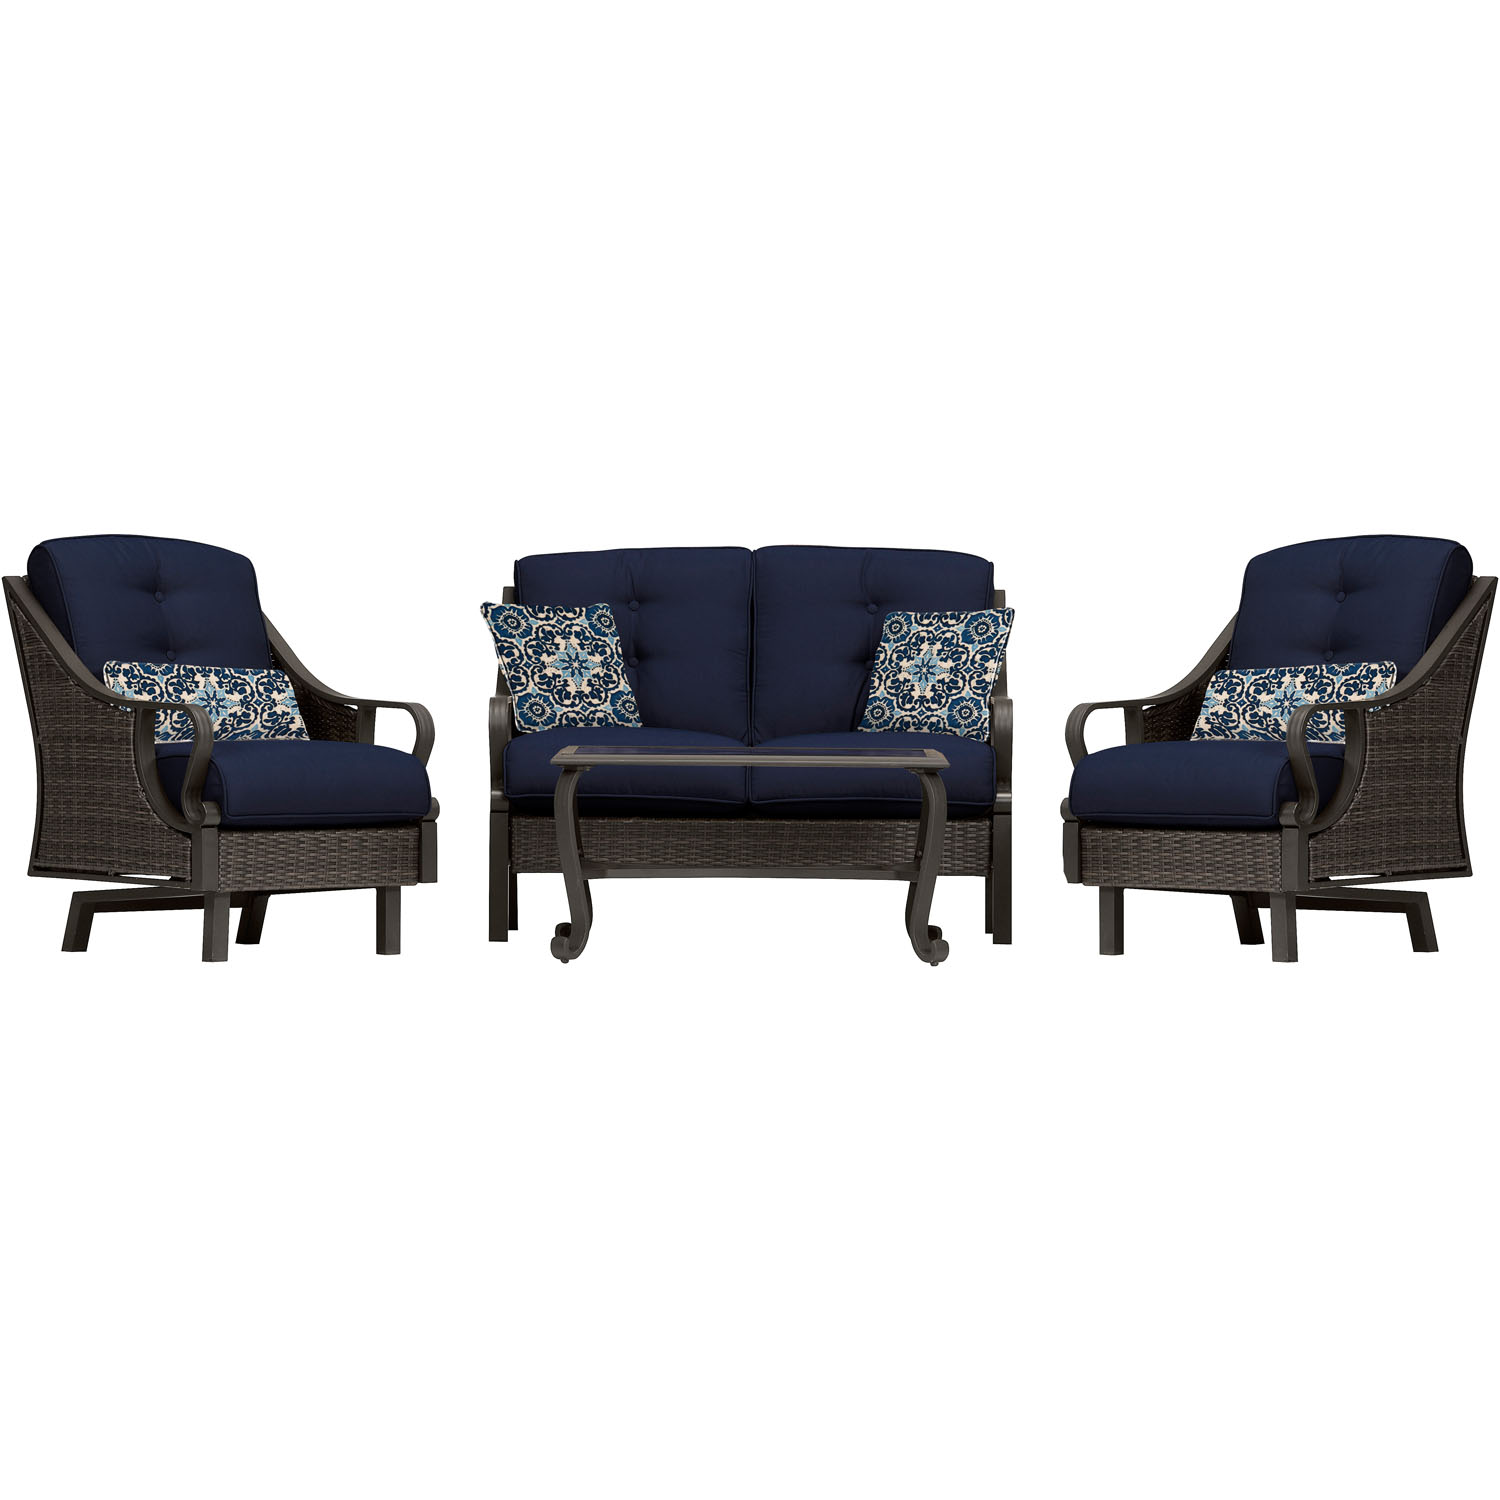 Hanover Ventura 4-Piece Steel Outdoor Patio Deep Seating Set Navy Blue Cushions, 4 Pillows and Rectangular Coffee Table, VENTURA4PC-NVY - image 1 of 12